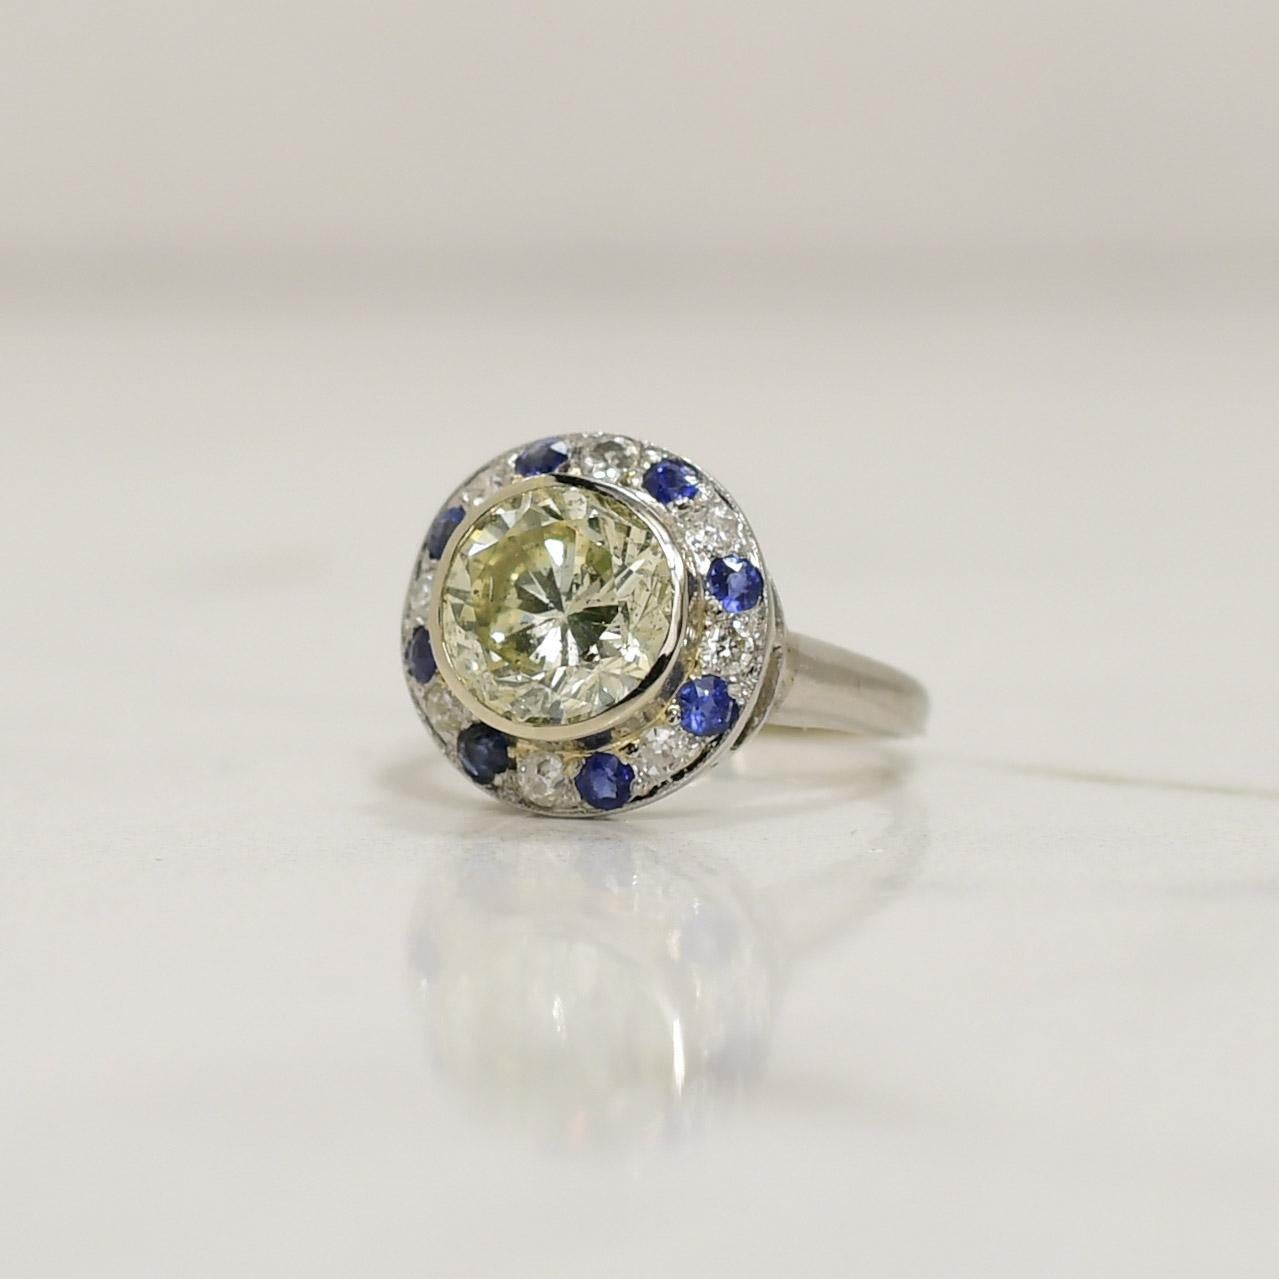 Crafted with elegance, the globe-shaped palladium Vintage Ring showcases a breathtaking union of 2.44 carats of dazzling diamonds and rich sapphires, evoking a timeless allure. The exquisite design, reminiscent of a celestial orb, features